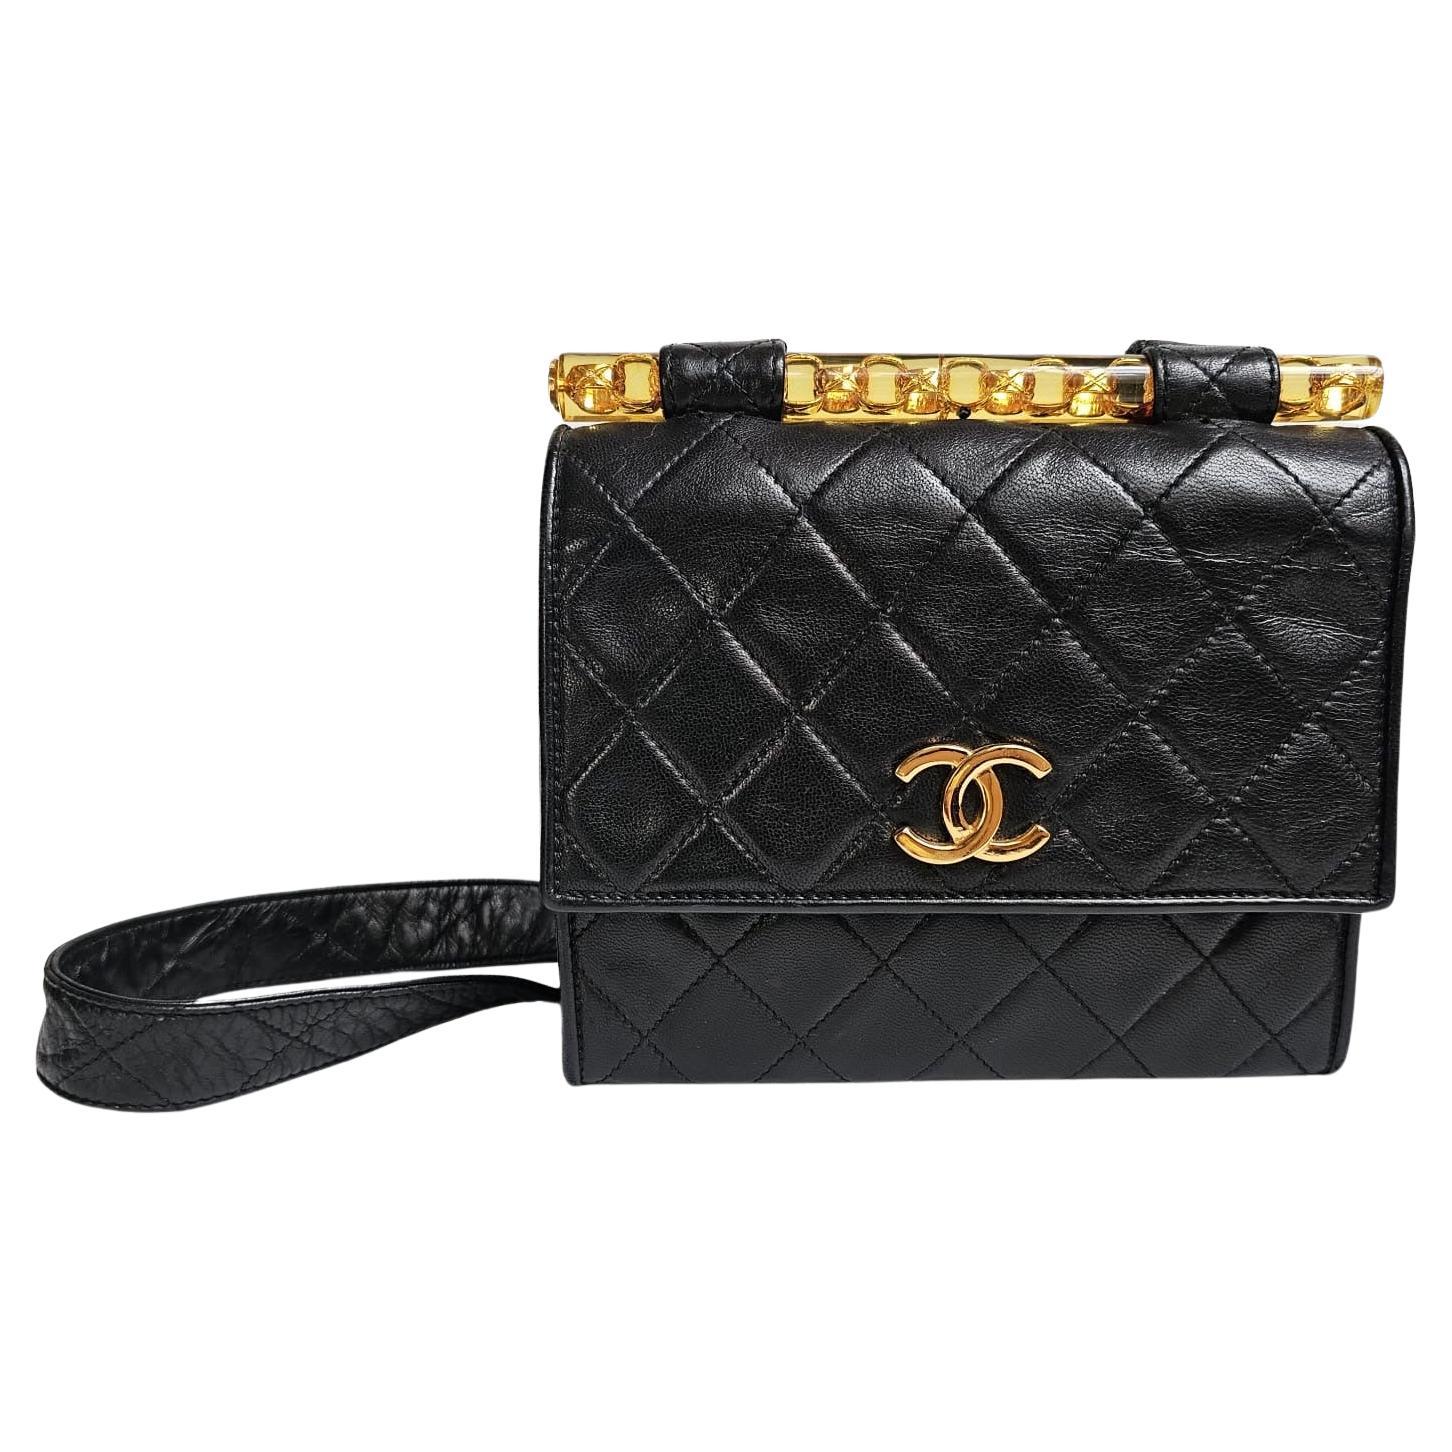 Do Chanel bags have names?